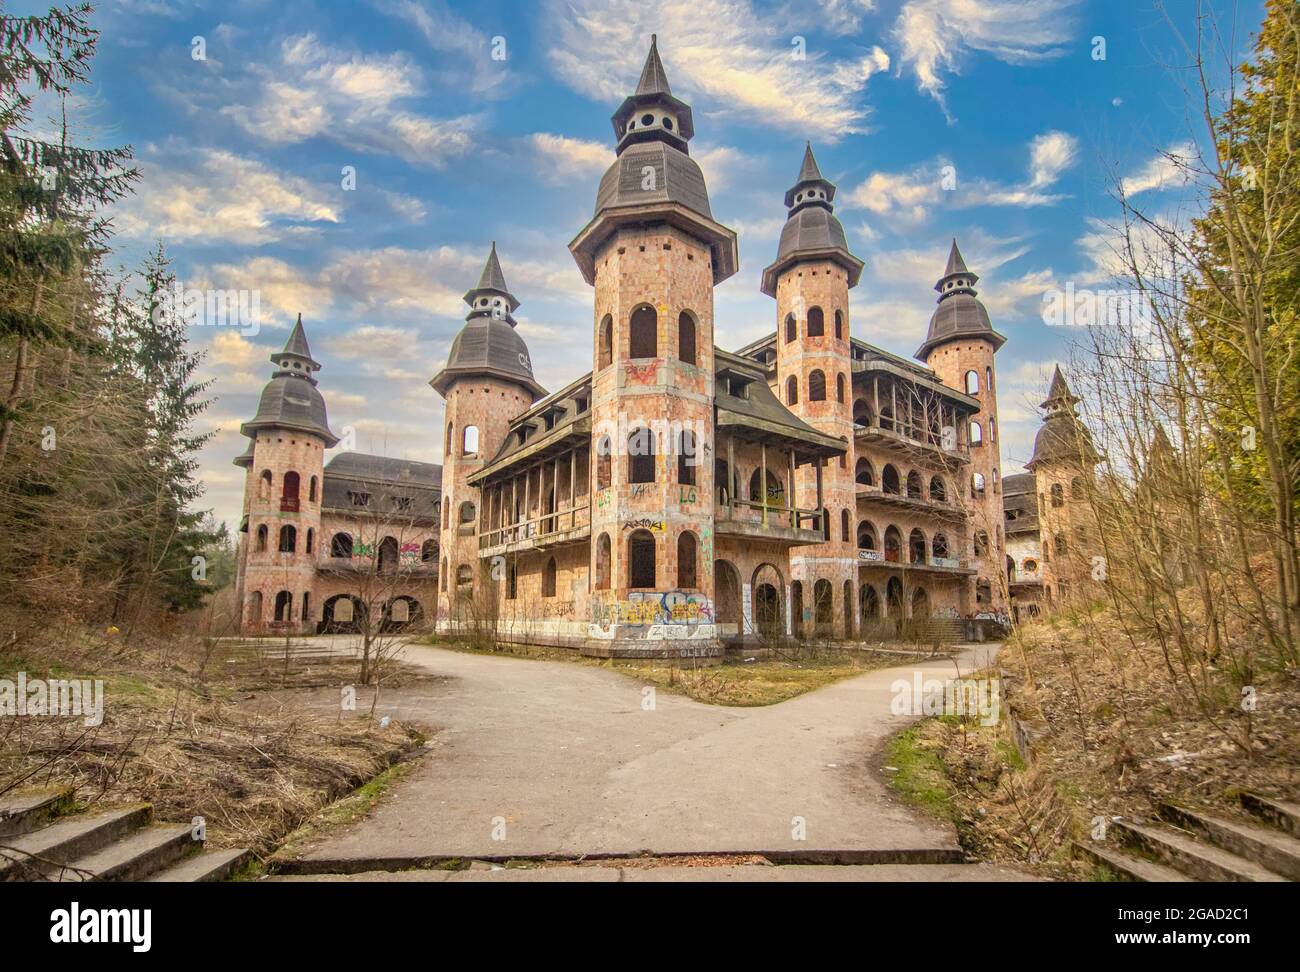 Built in 1983 but never finished, the ruins of Łapalice Castle are an interesting tourist attractions in northern Poland. Here its externals Stock Photo